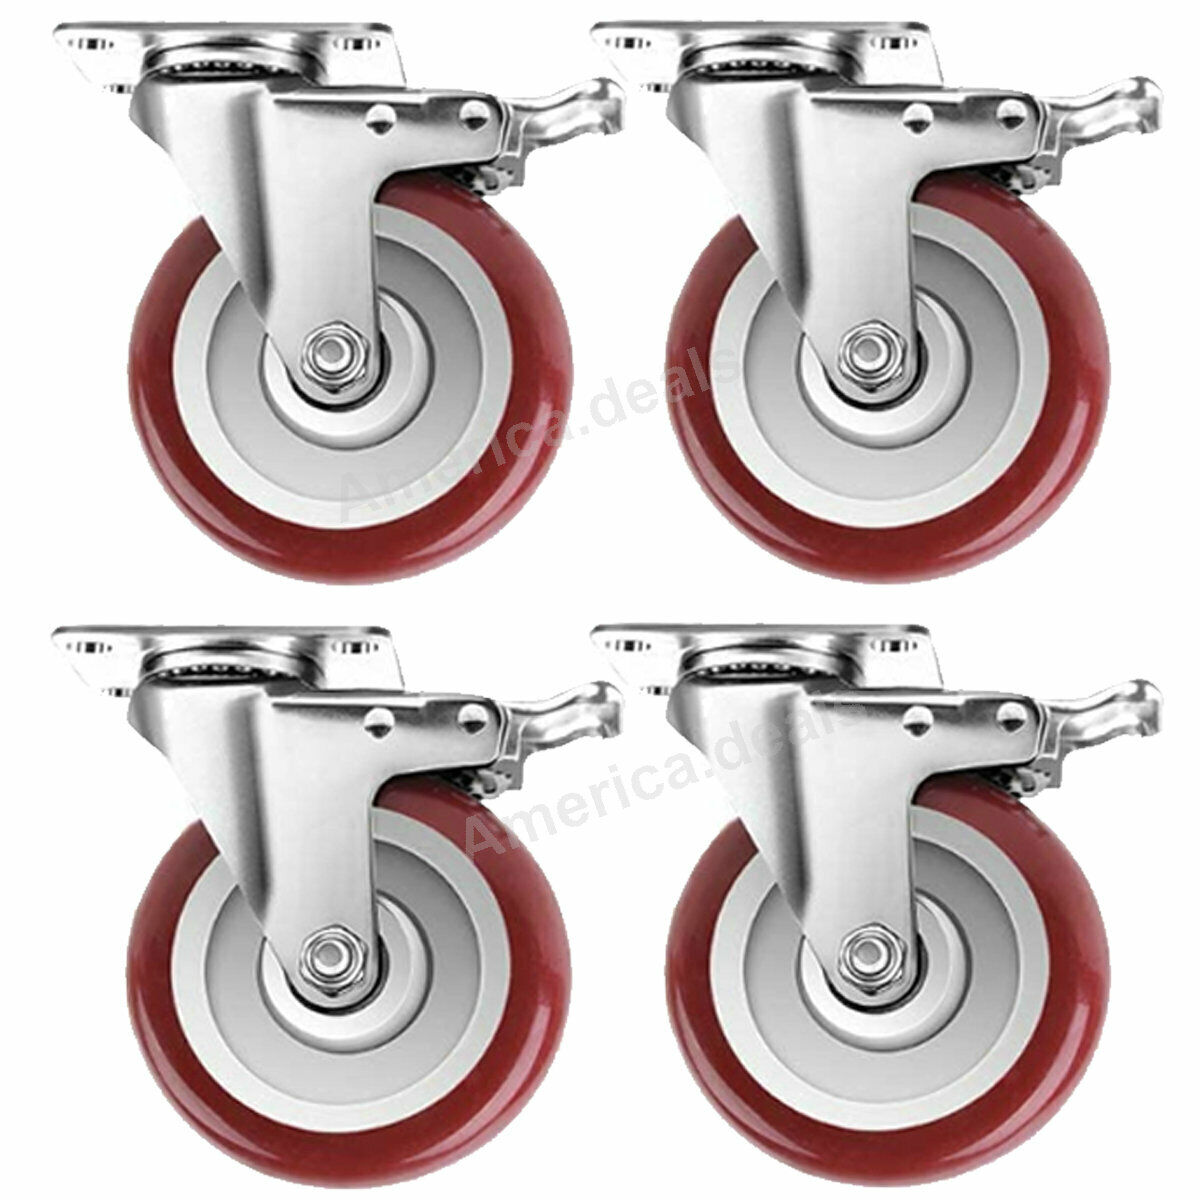 4 Pack 5 Inches Caster Wheels Locking Casters with Brake Swivel Plate Castors AD Does Not Apply